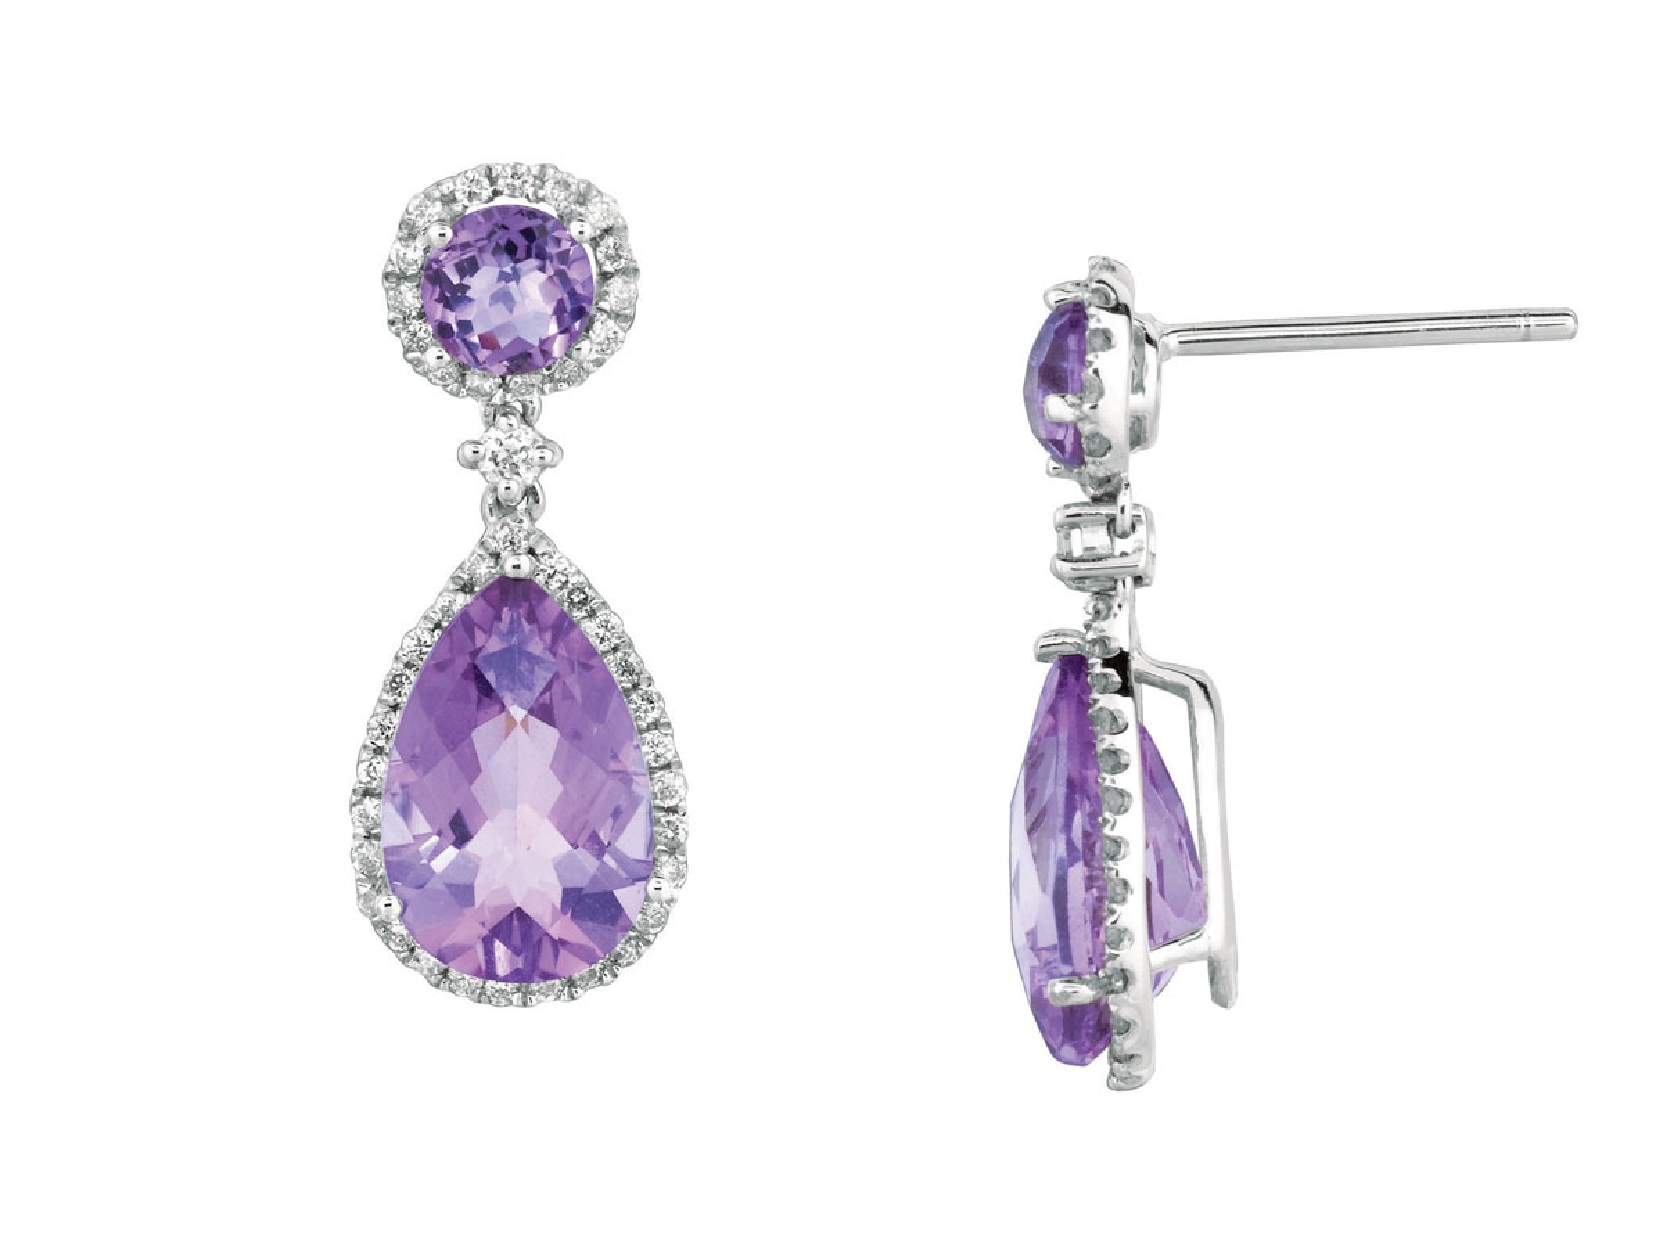 14K White Gold Round Amethyst Stud Earrings with Pear Shape Amethyst Drop with Diamond Accents

6.80cttw Amethysts
0.50cttw Diamonds 